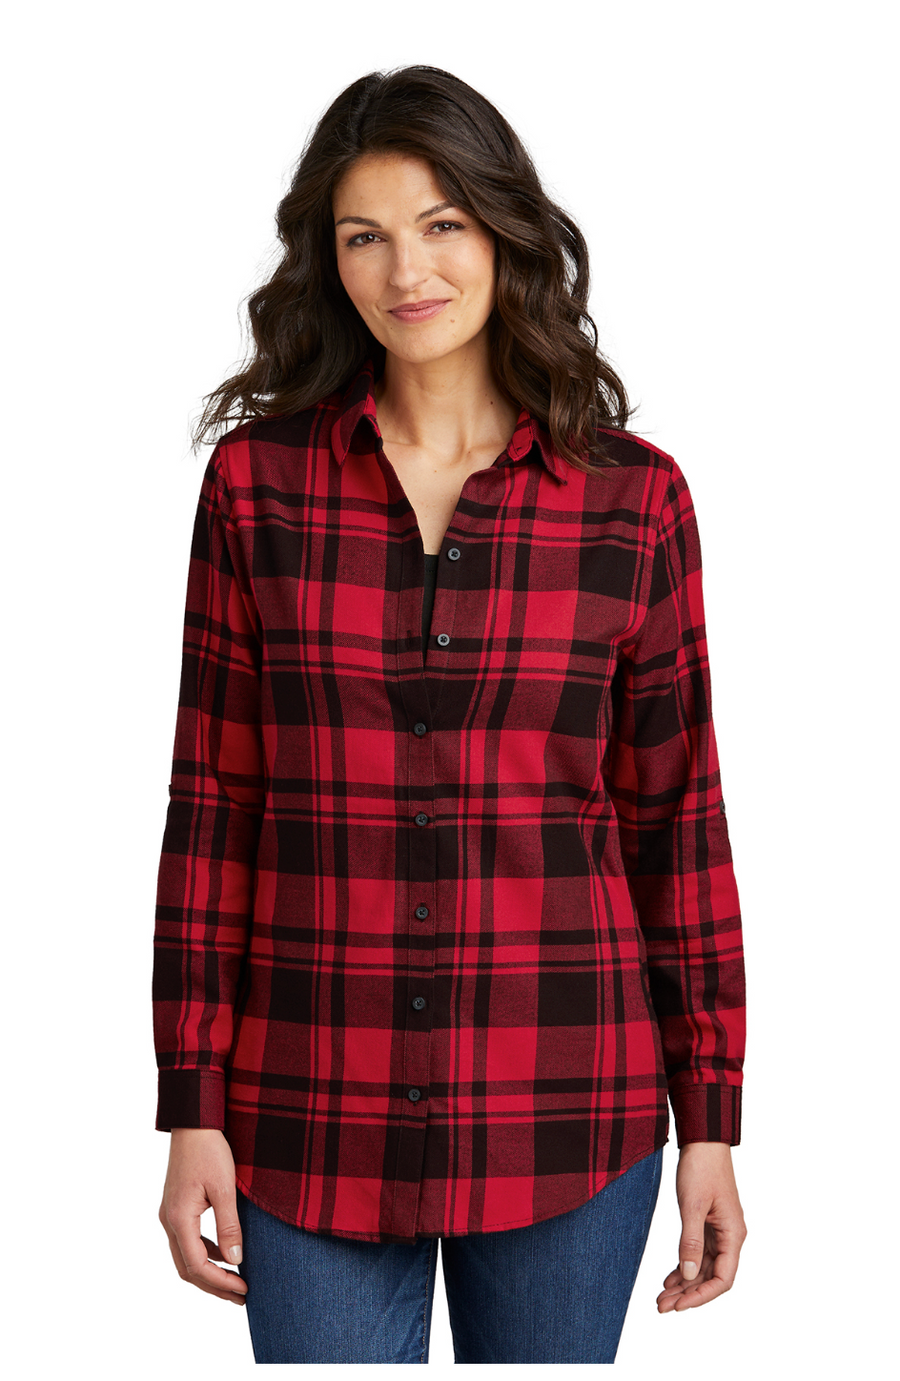 Authority Port Authority Ladies Plaid Flannel Shirt (Preorder)